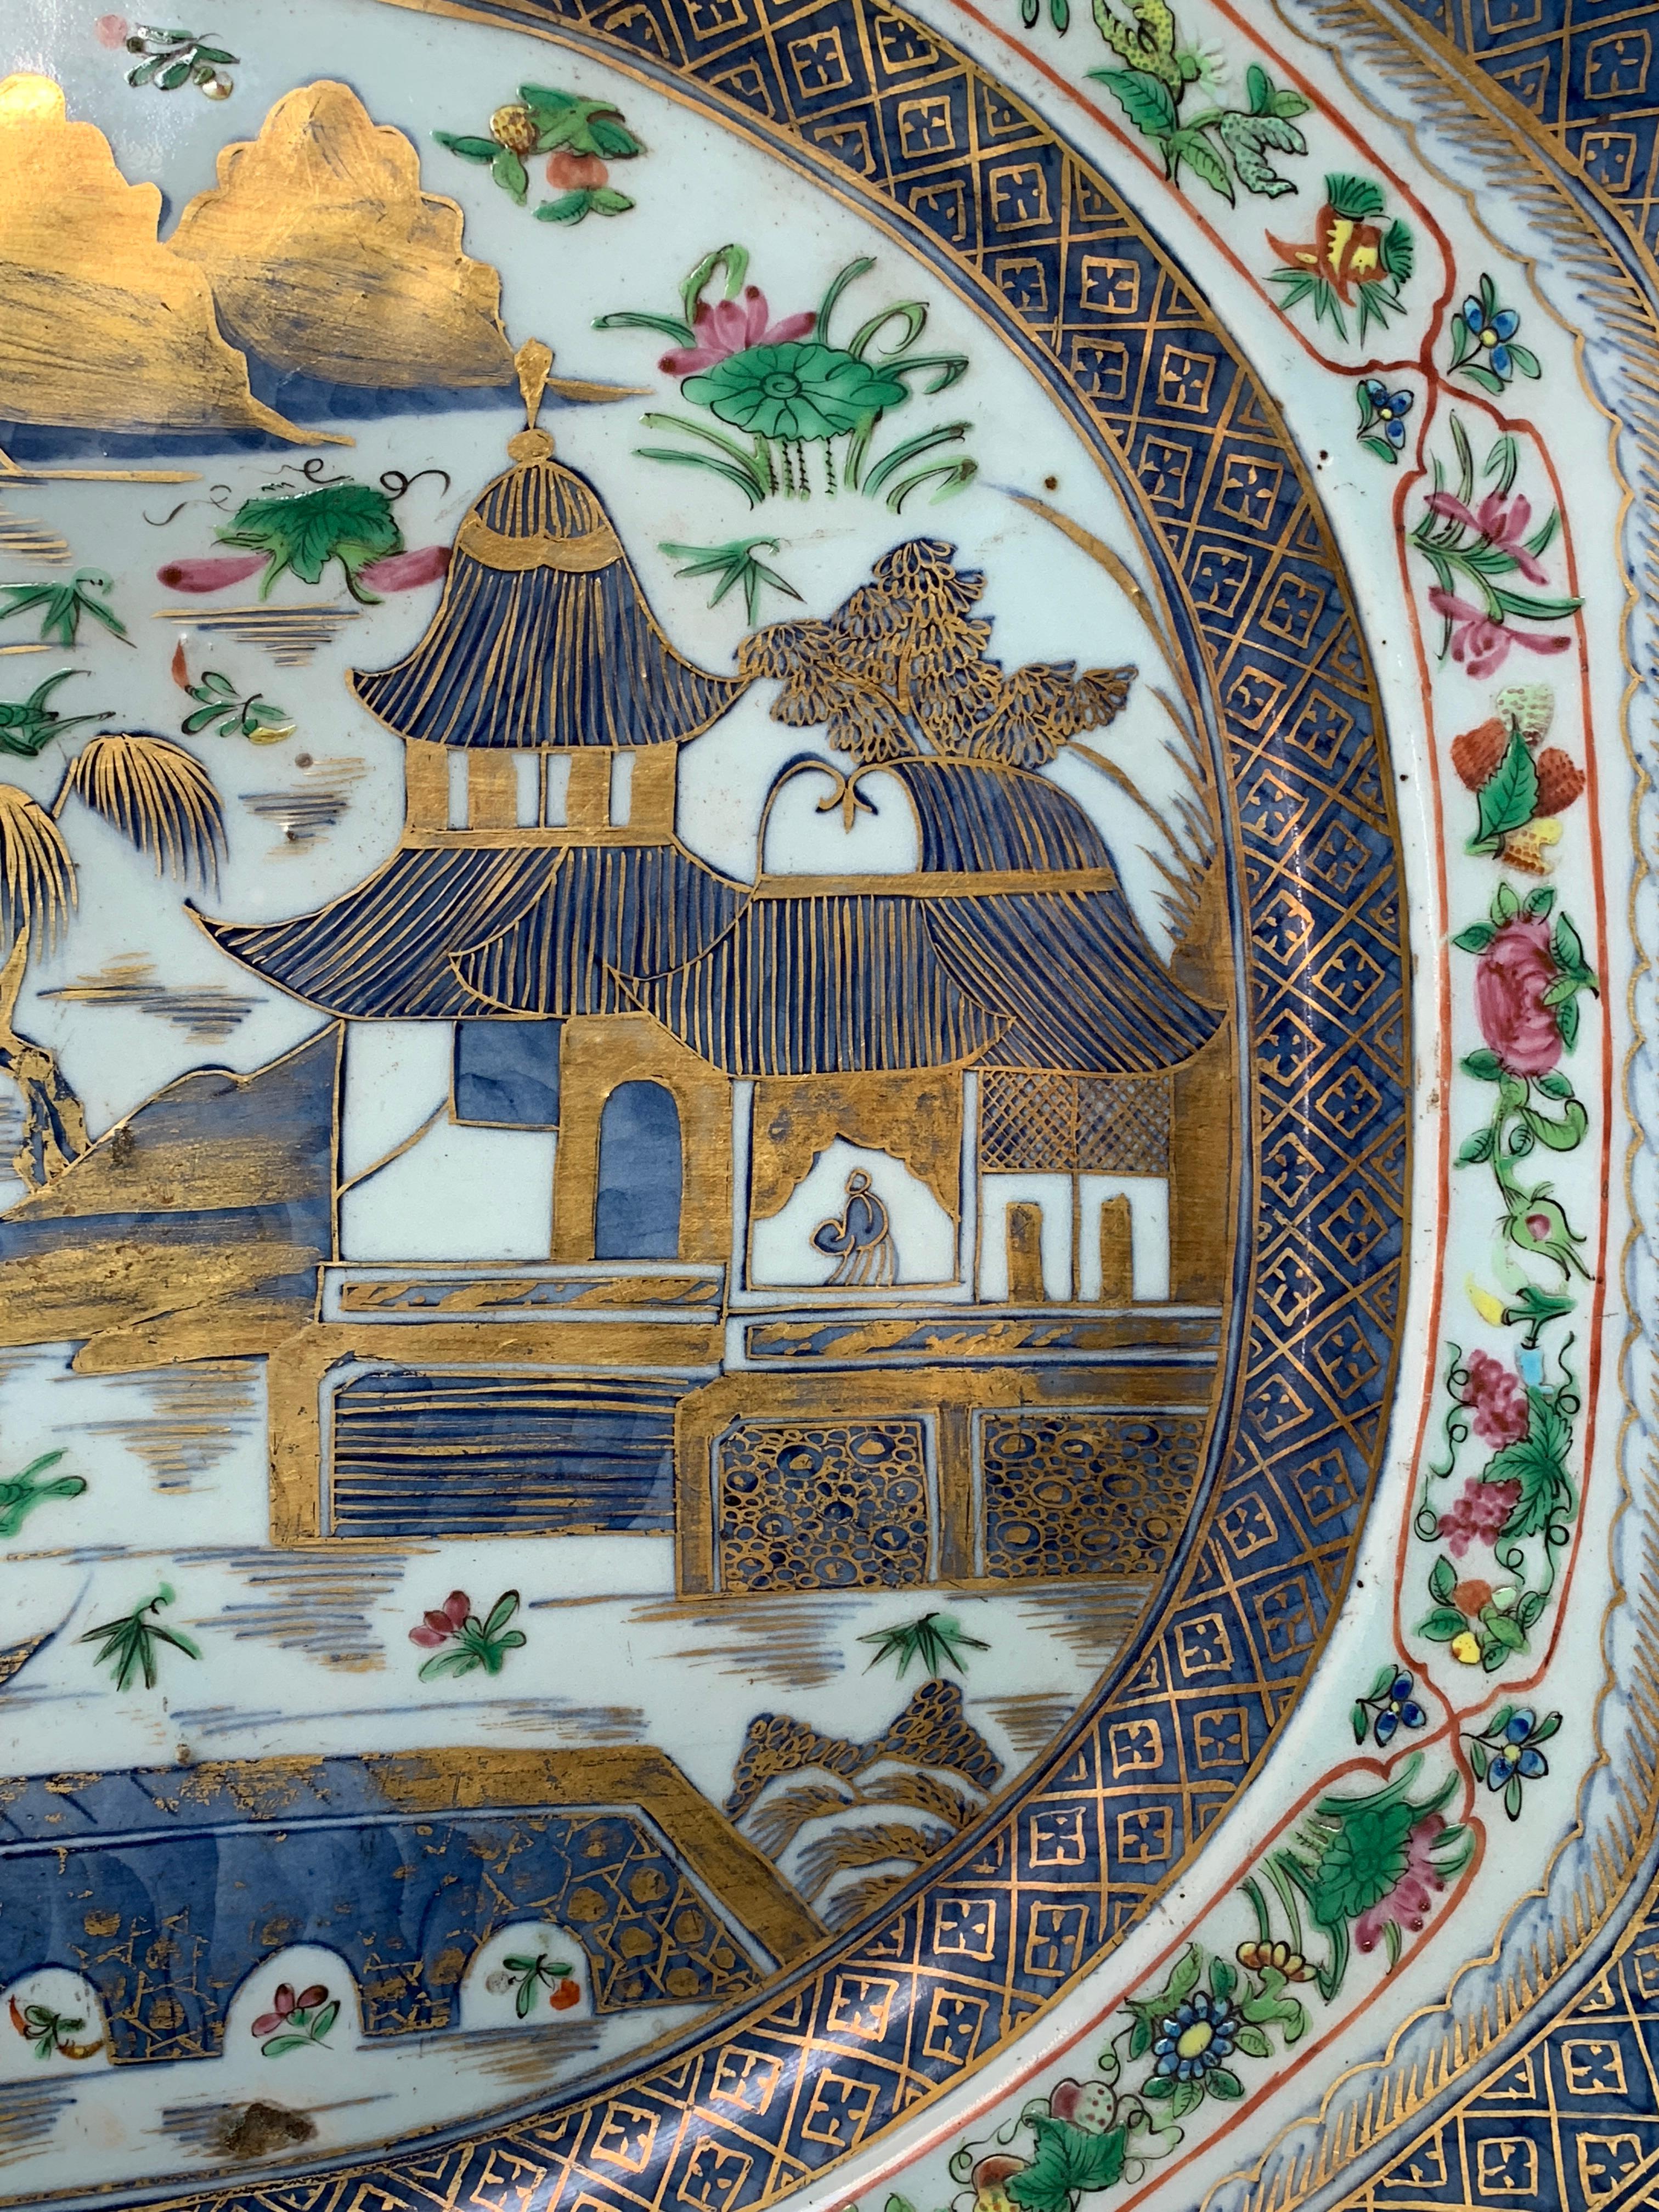 A stunning very large platter with underglaze blue and then with additional famille rose or rose medallion frieze added over the glaze and then further embellished with minutely painted highlighting in gold.